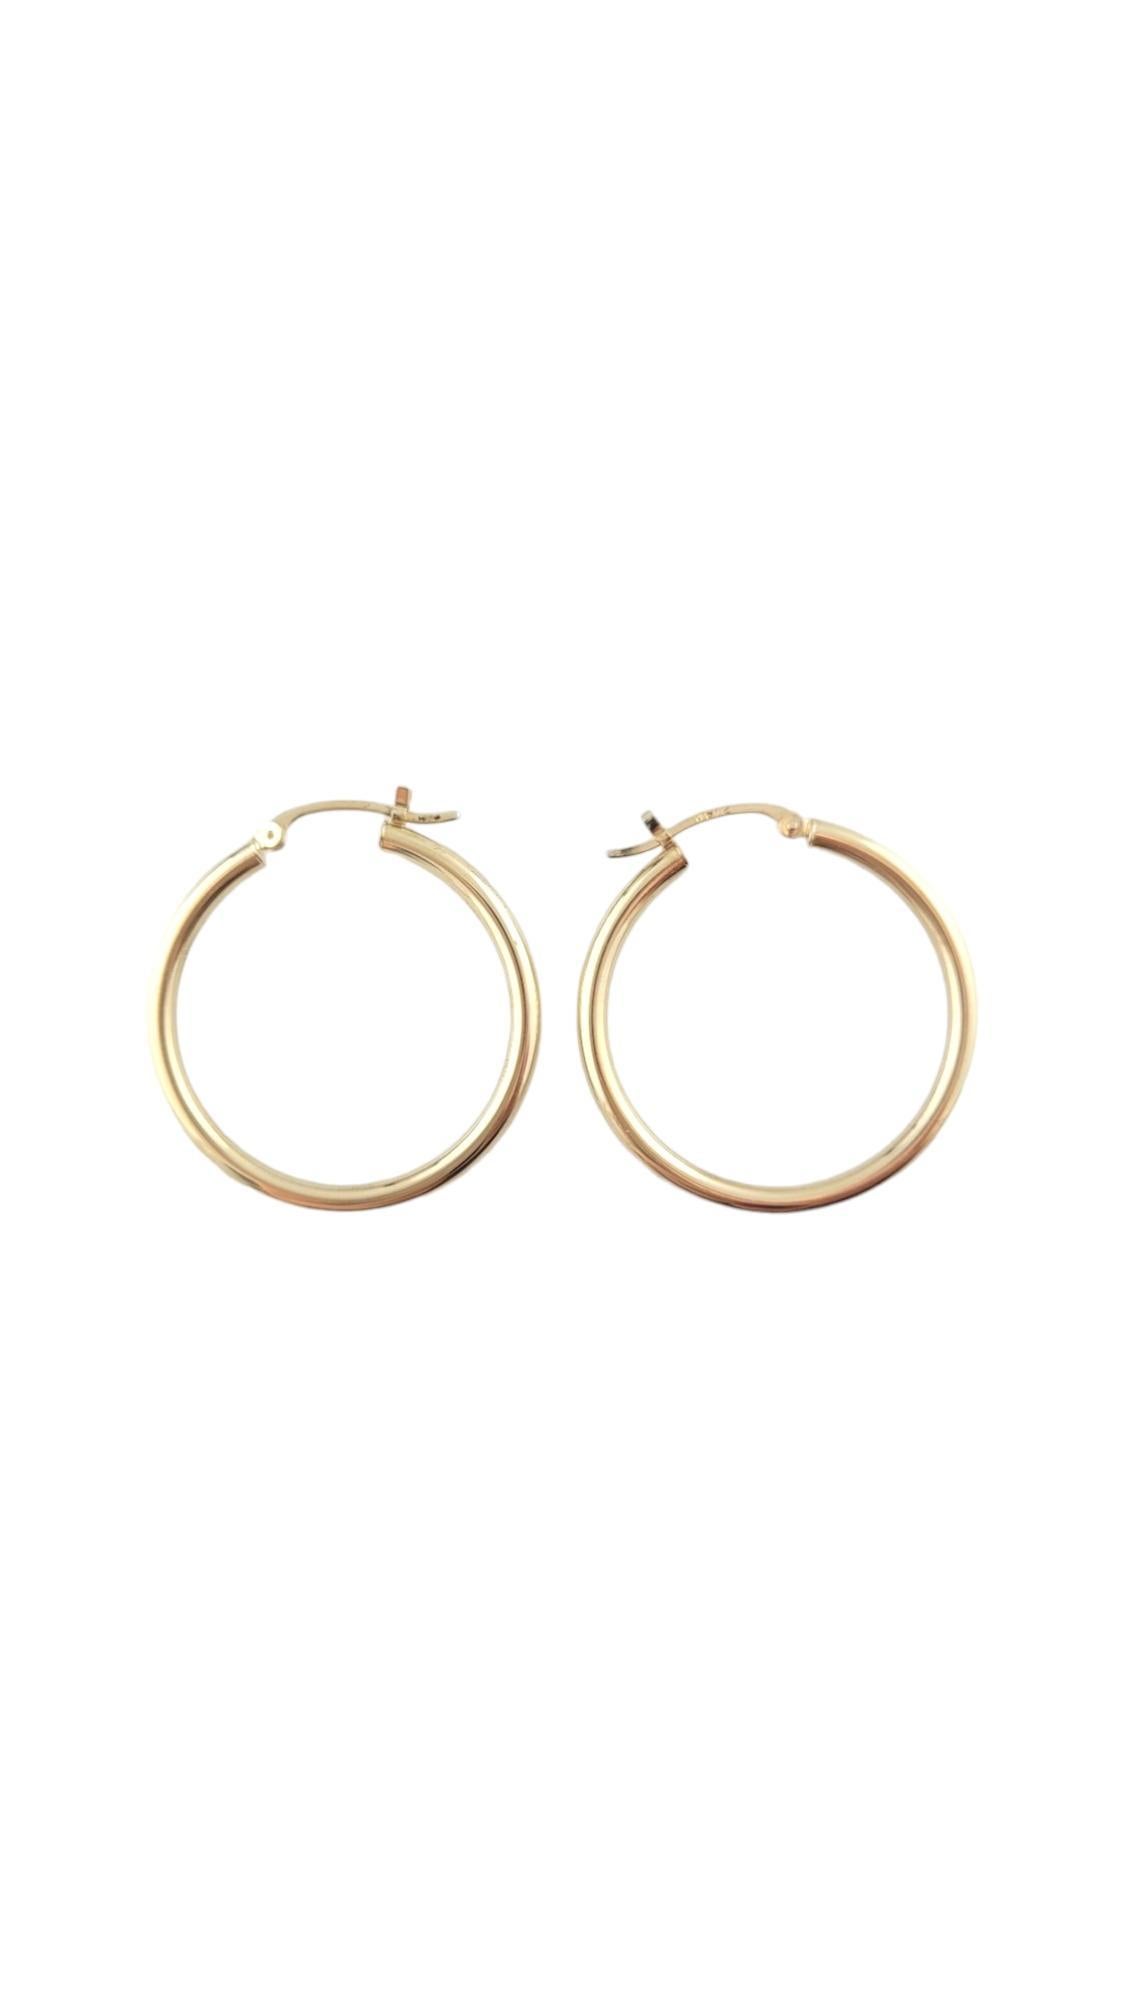 14 Karat Yellow Gold Hoop Earrings-

These classic gold hoops are a timeless addition to your collection. 

Size: 29.8 mm x 2.3 mm x 2.4 mm. 

Stamped: 14K

Weight: 1.0 dwt./ 1.6 gr.

Very good condition, professionally polished.

Will come packaged